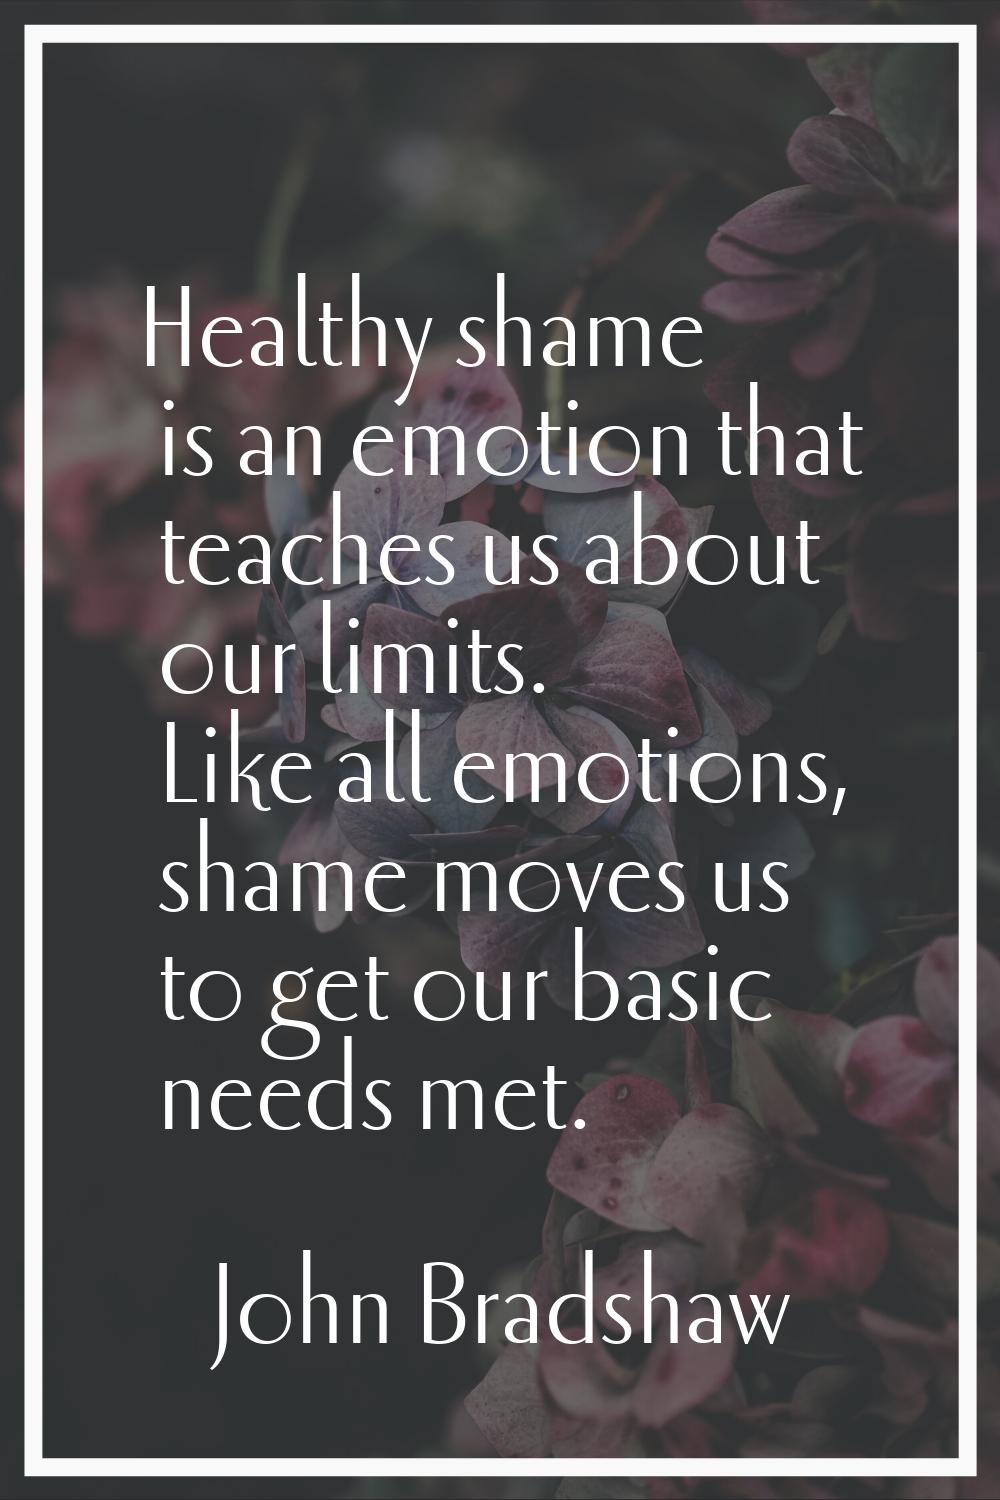 Healthy shame is an emotion that teaches us about our limits. Like all emotions, shame moves us to 